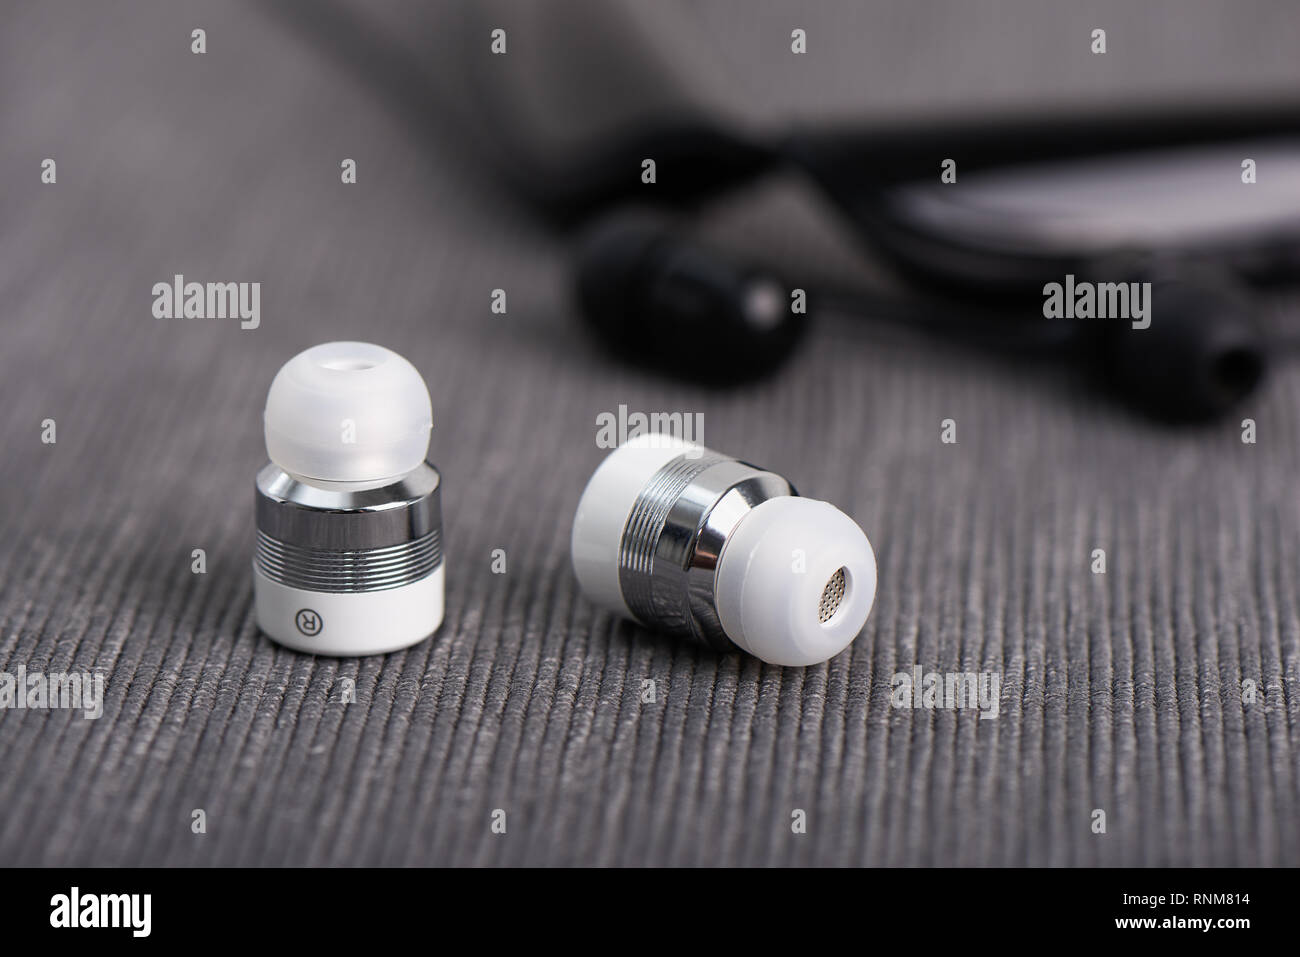 wireless cordless bluetooth earbuds on a background of neck band type earphone Stock Photo